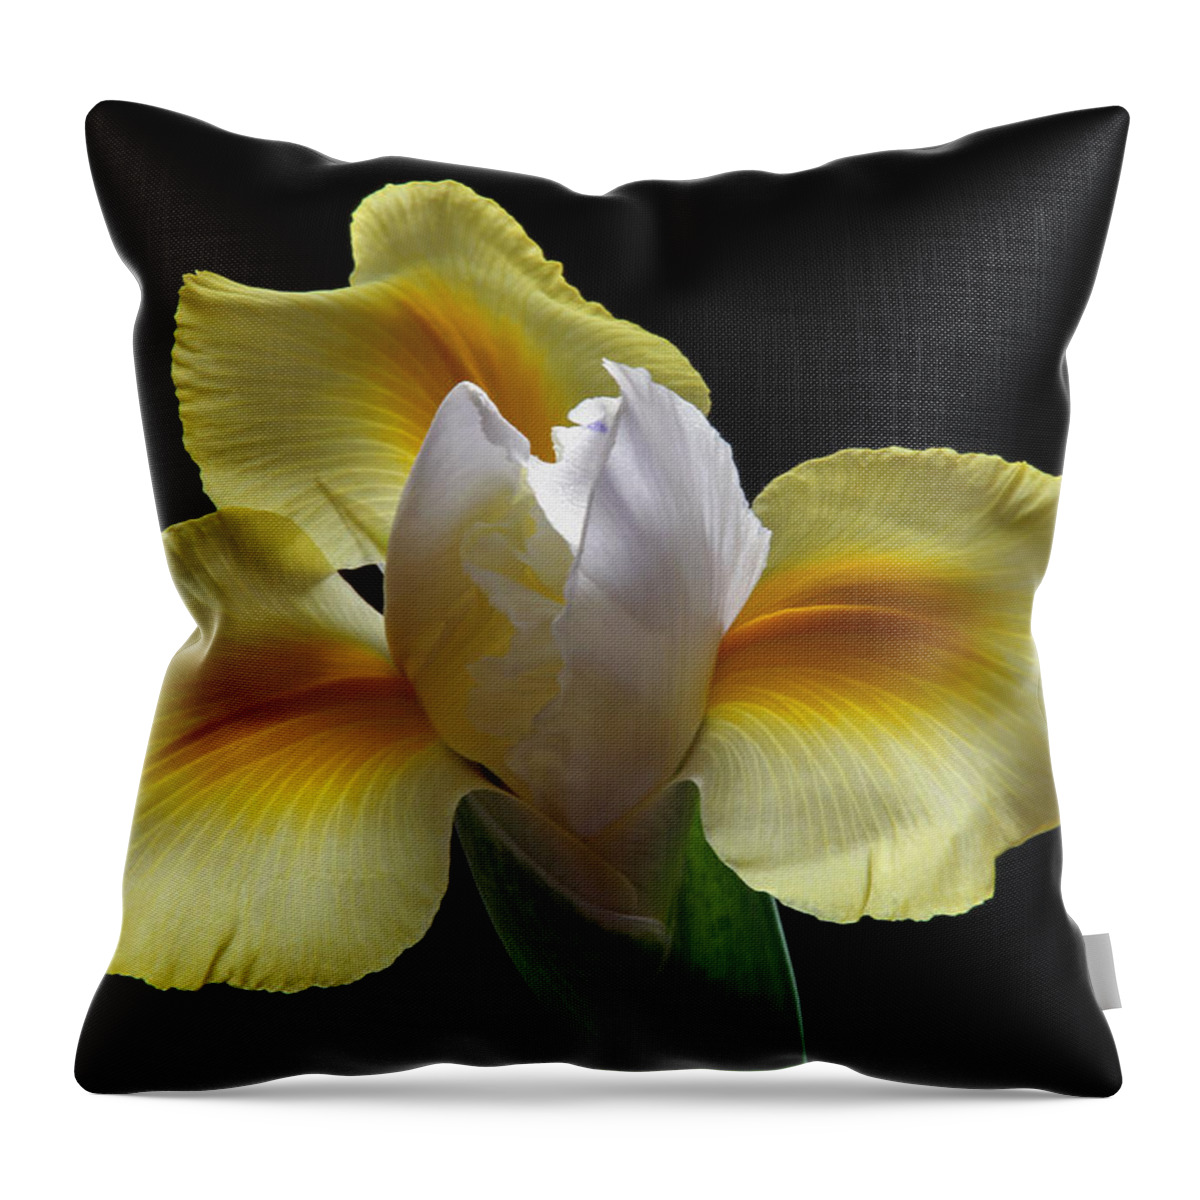 Iris Throw Pillow featuring the photograph Floral Roar by Juergen Roth